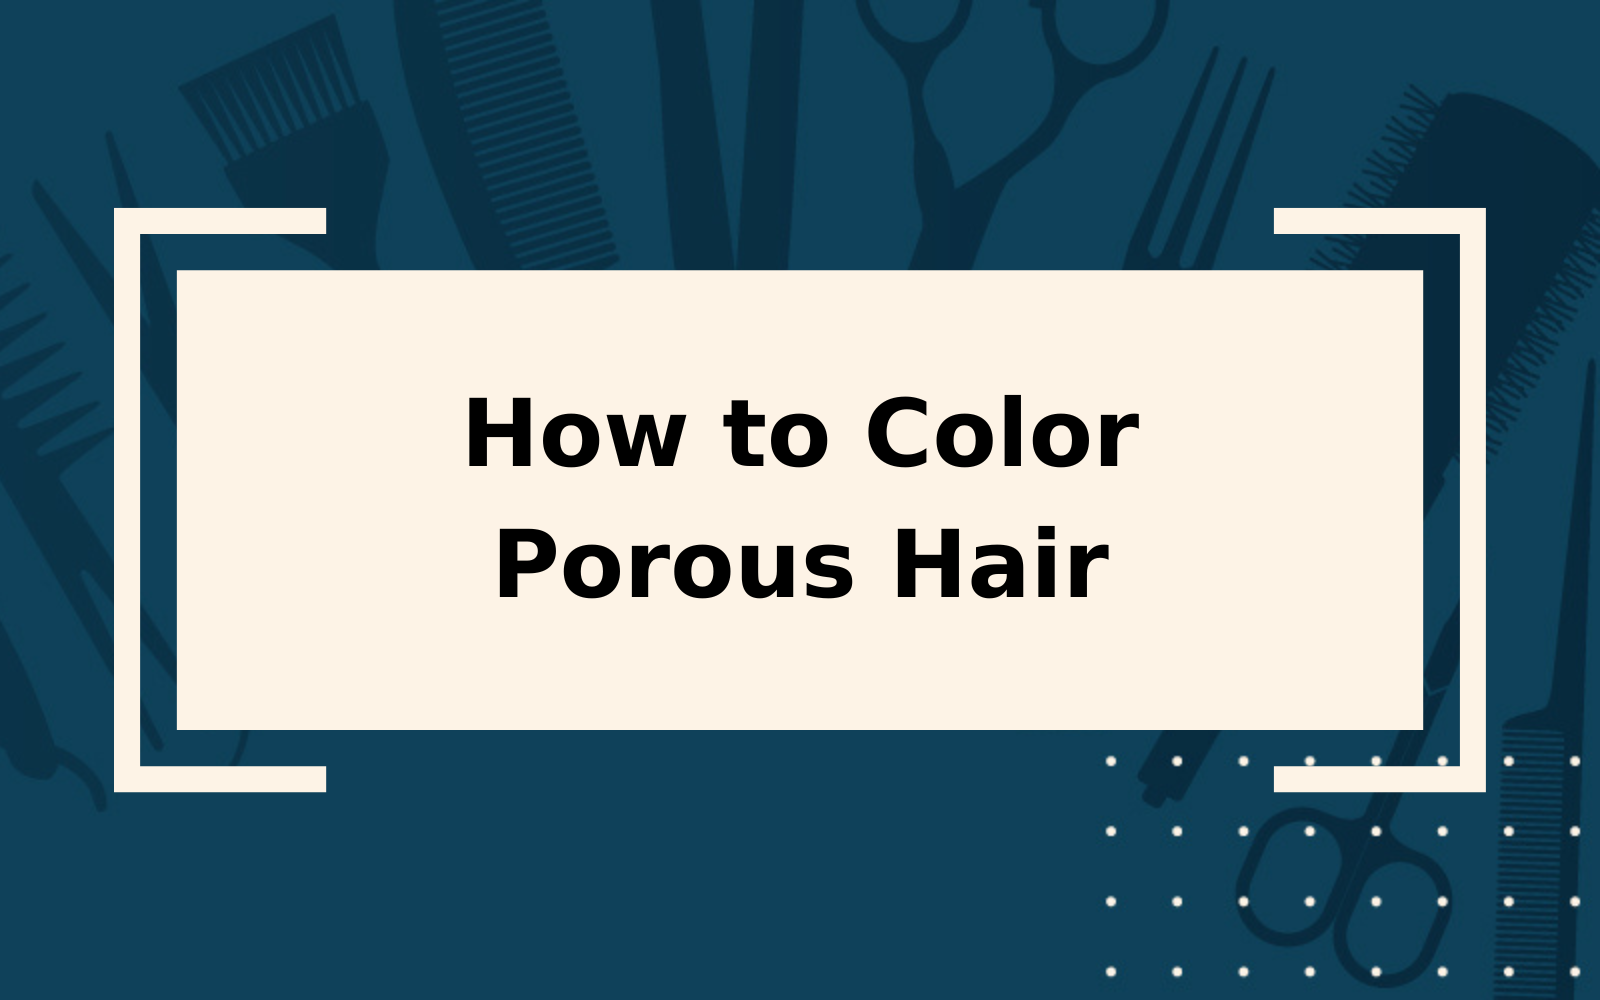 Coloring Porous Hair | Step-by-Step Guide & Care Tips